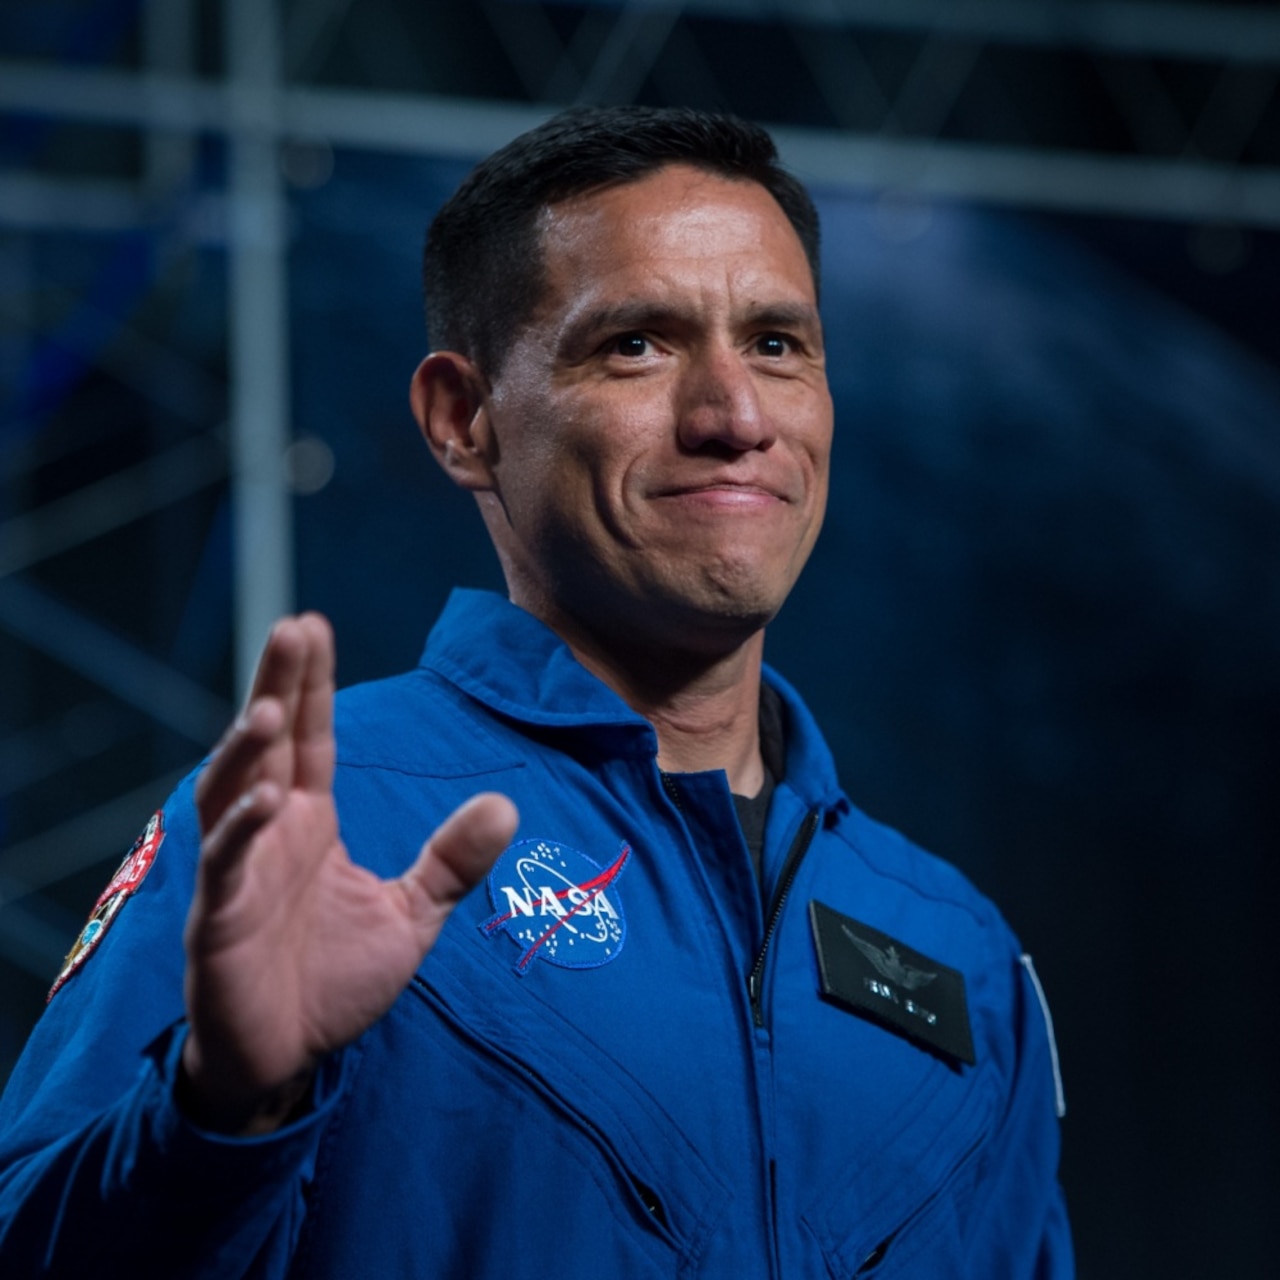 Army Maj. (Dr.) Francisco Rubio waves as he is introduced as one of 12 new astronaut candidates at NASA’s Johnson Space Center in Houston, Texas, June 7, 2017. After completing two years of training, the new astronaut candidates could be assigned to research missions aboard the International Space Station, on launches from American soil aboard spacecraft built by commercial companies or on deep-space missions aboard NASA’s new Orion spacecraft and Space Launch System rocket. NASA photo by Bill Ingalls